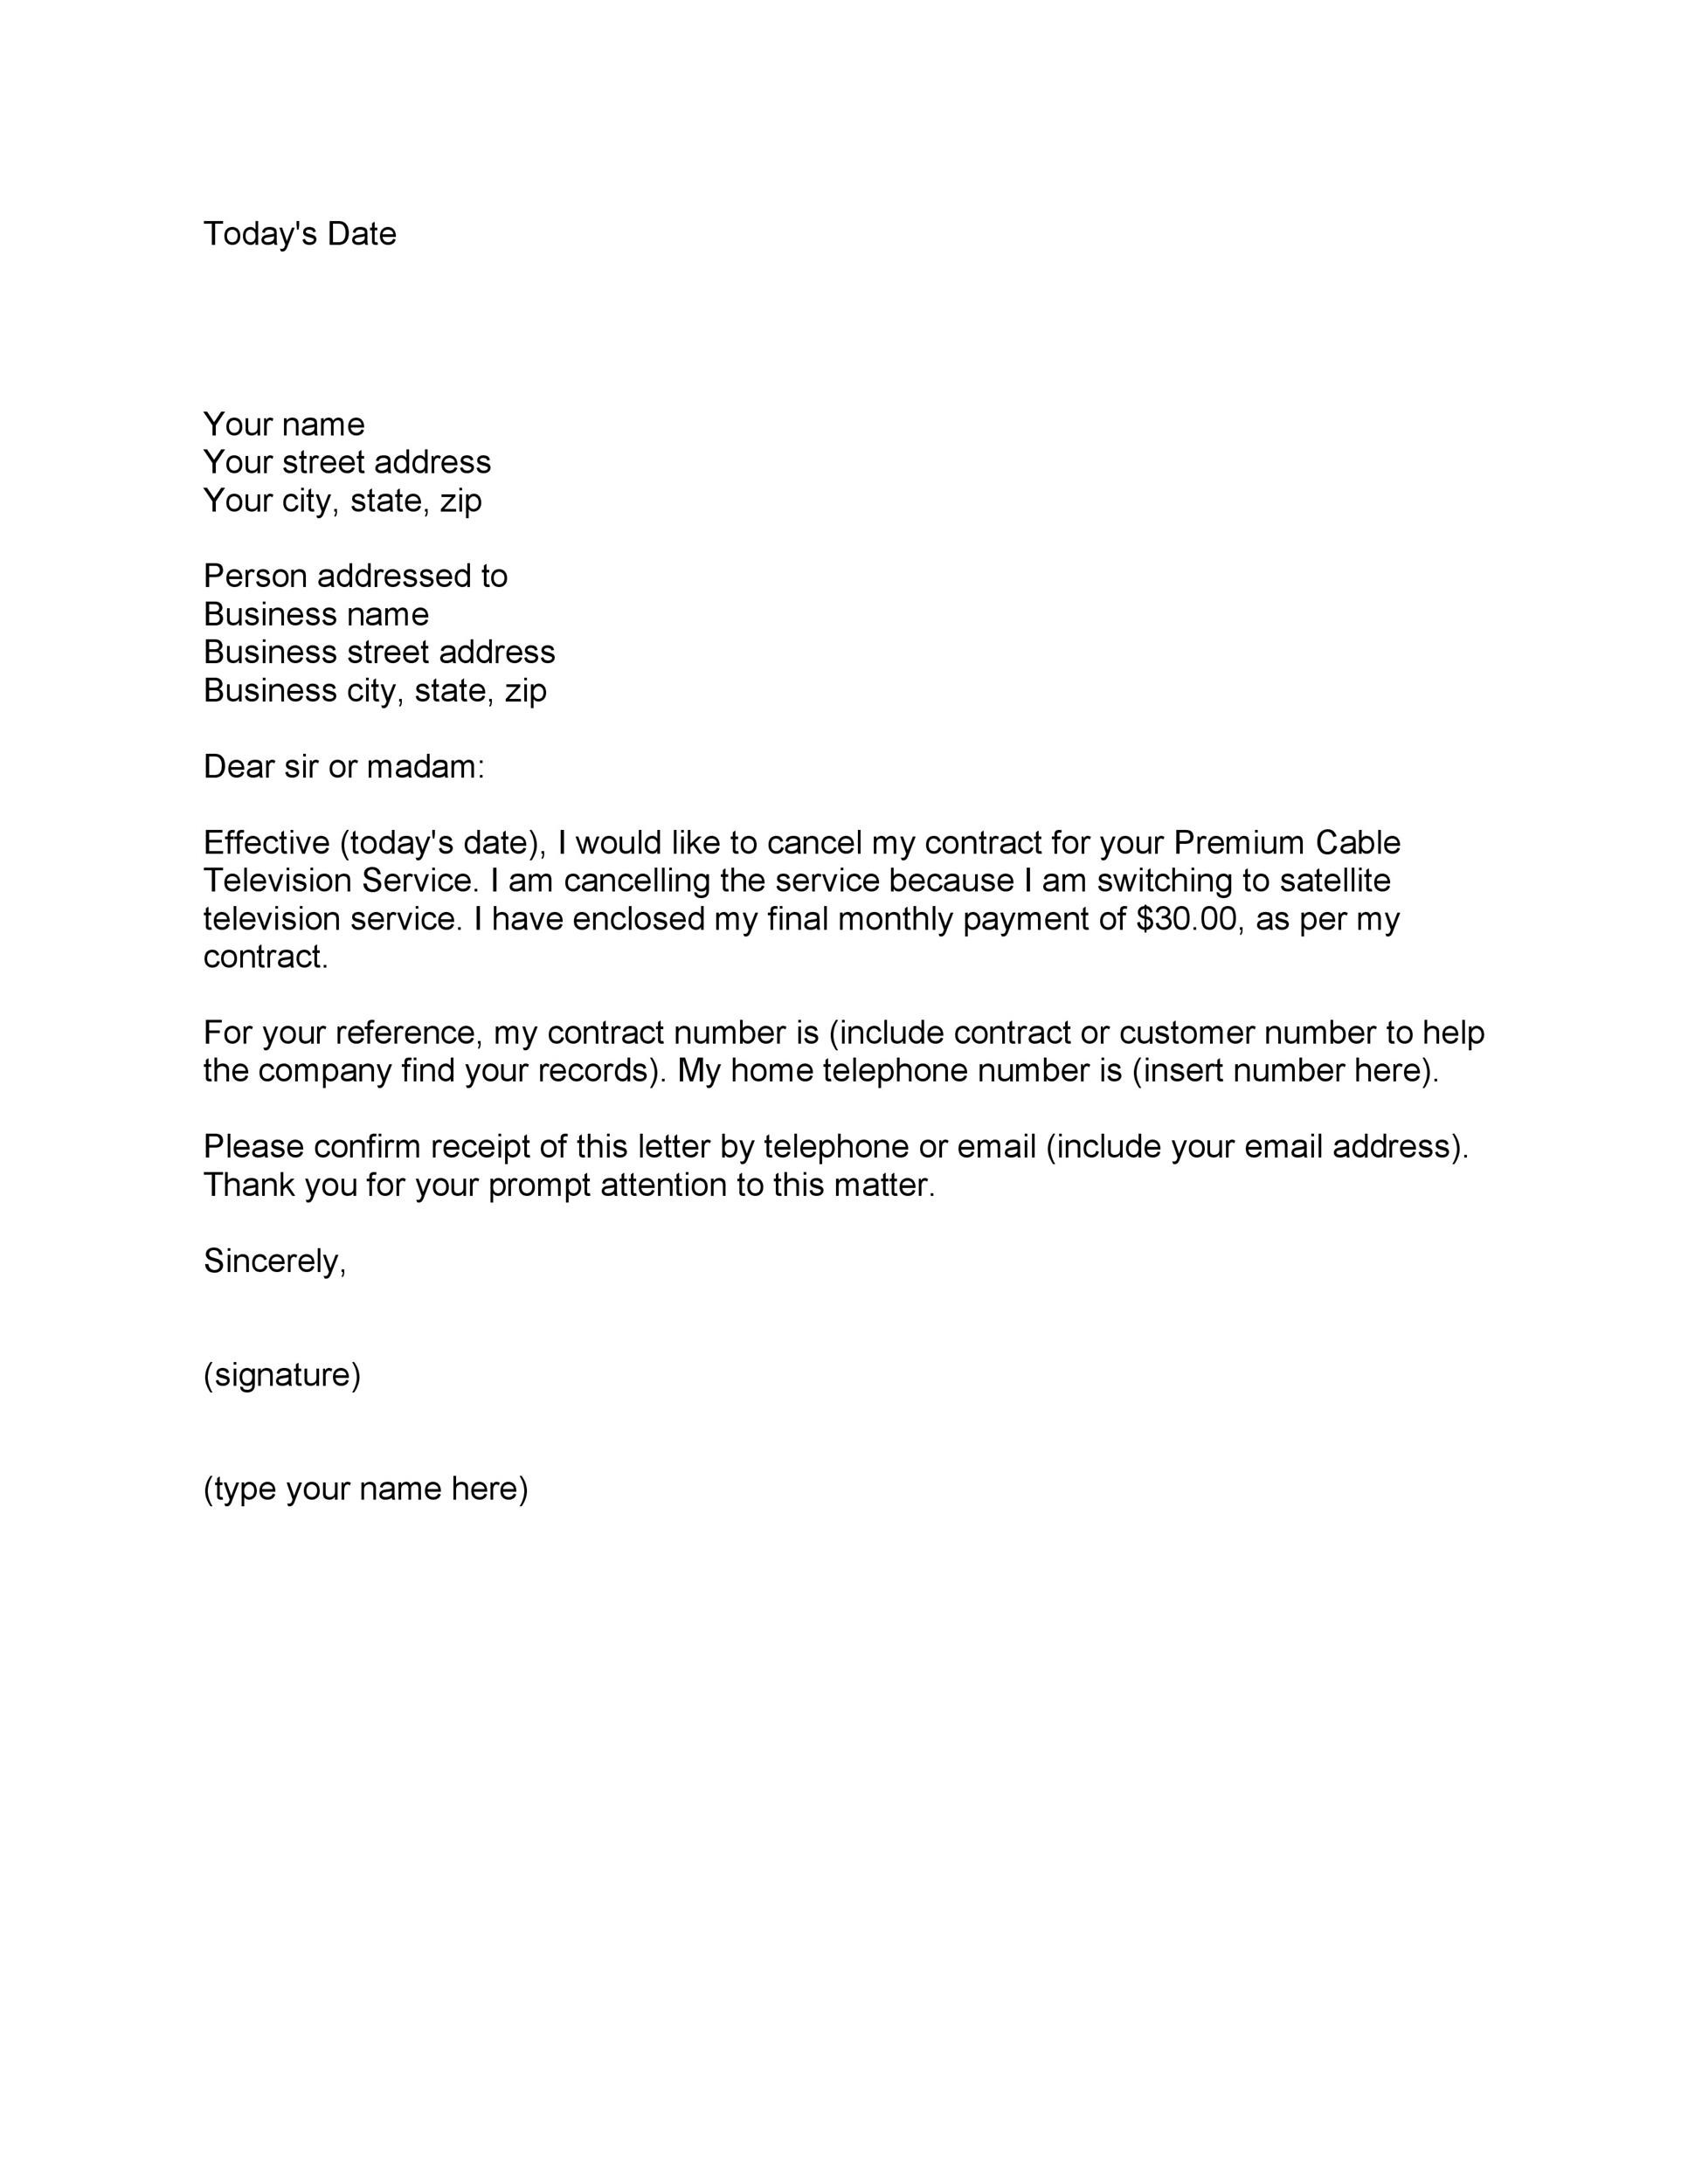 contract-cancellation-letter-sample-database-letter-template-collection